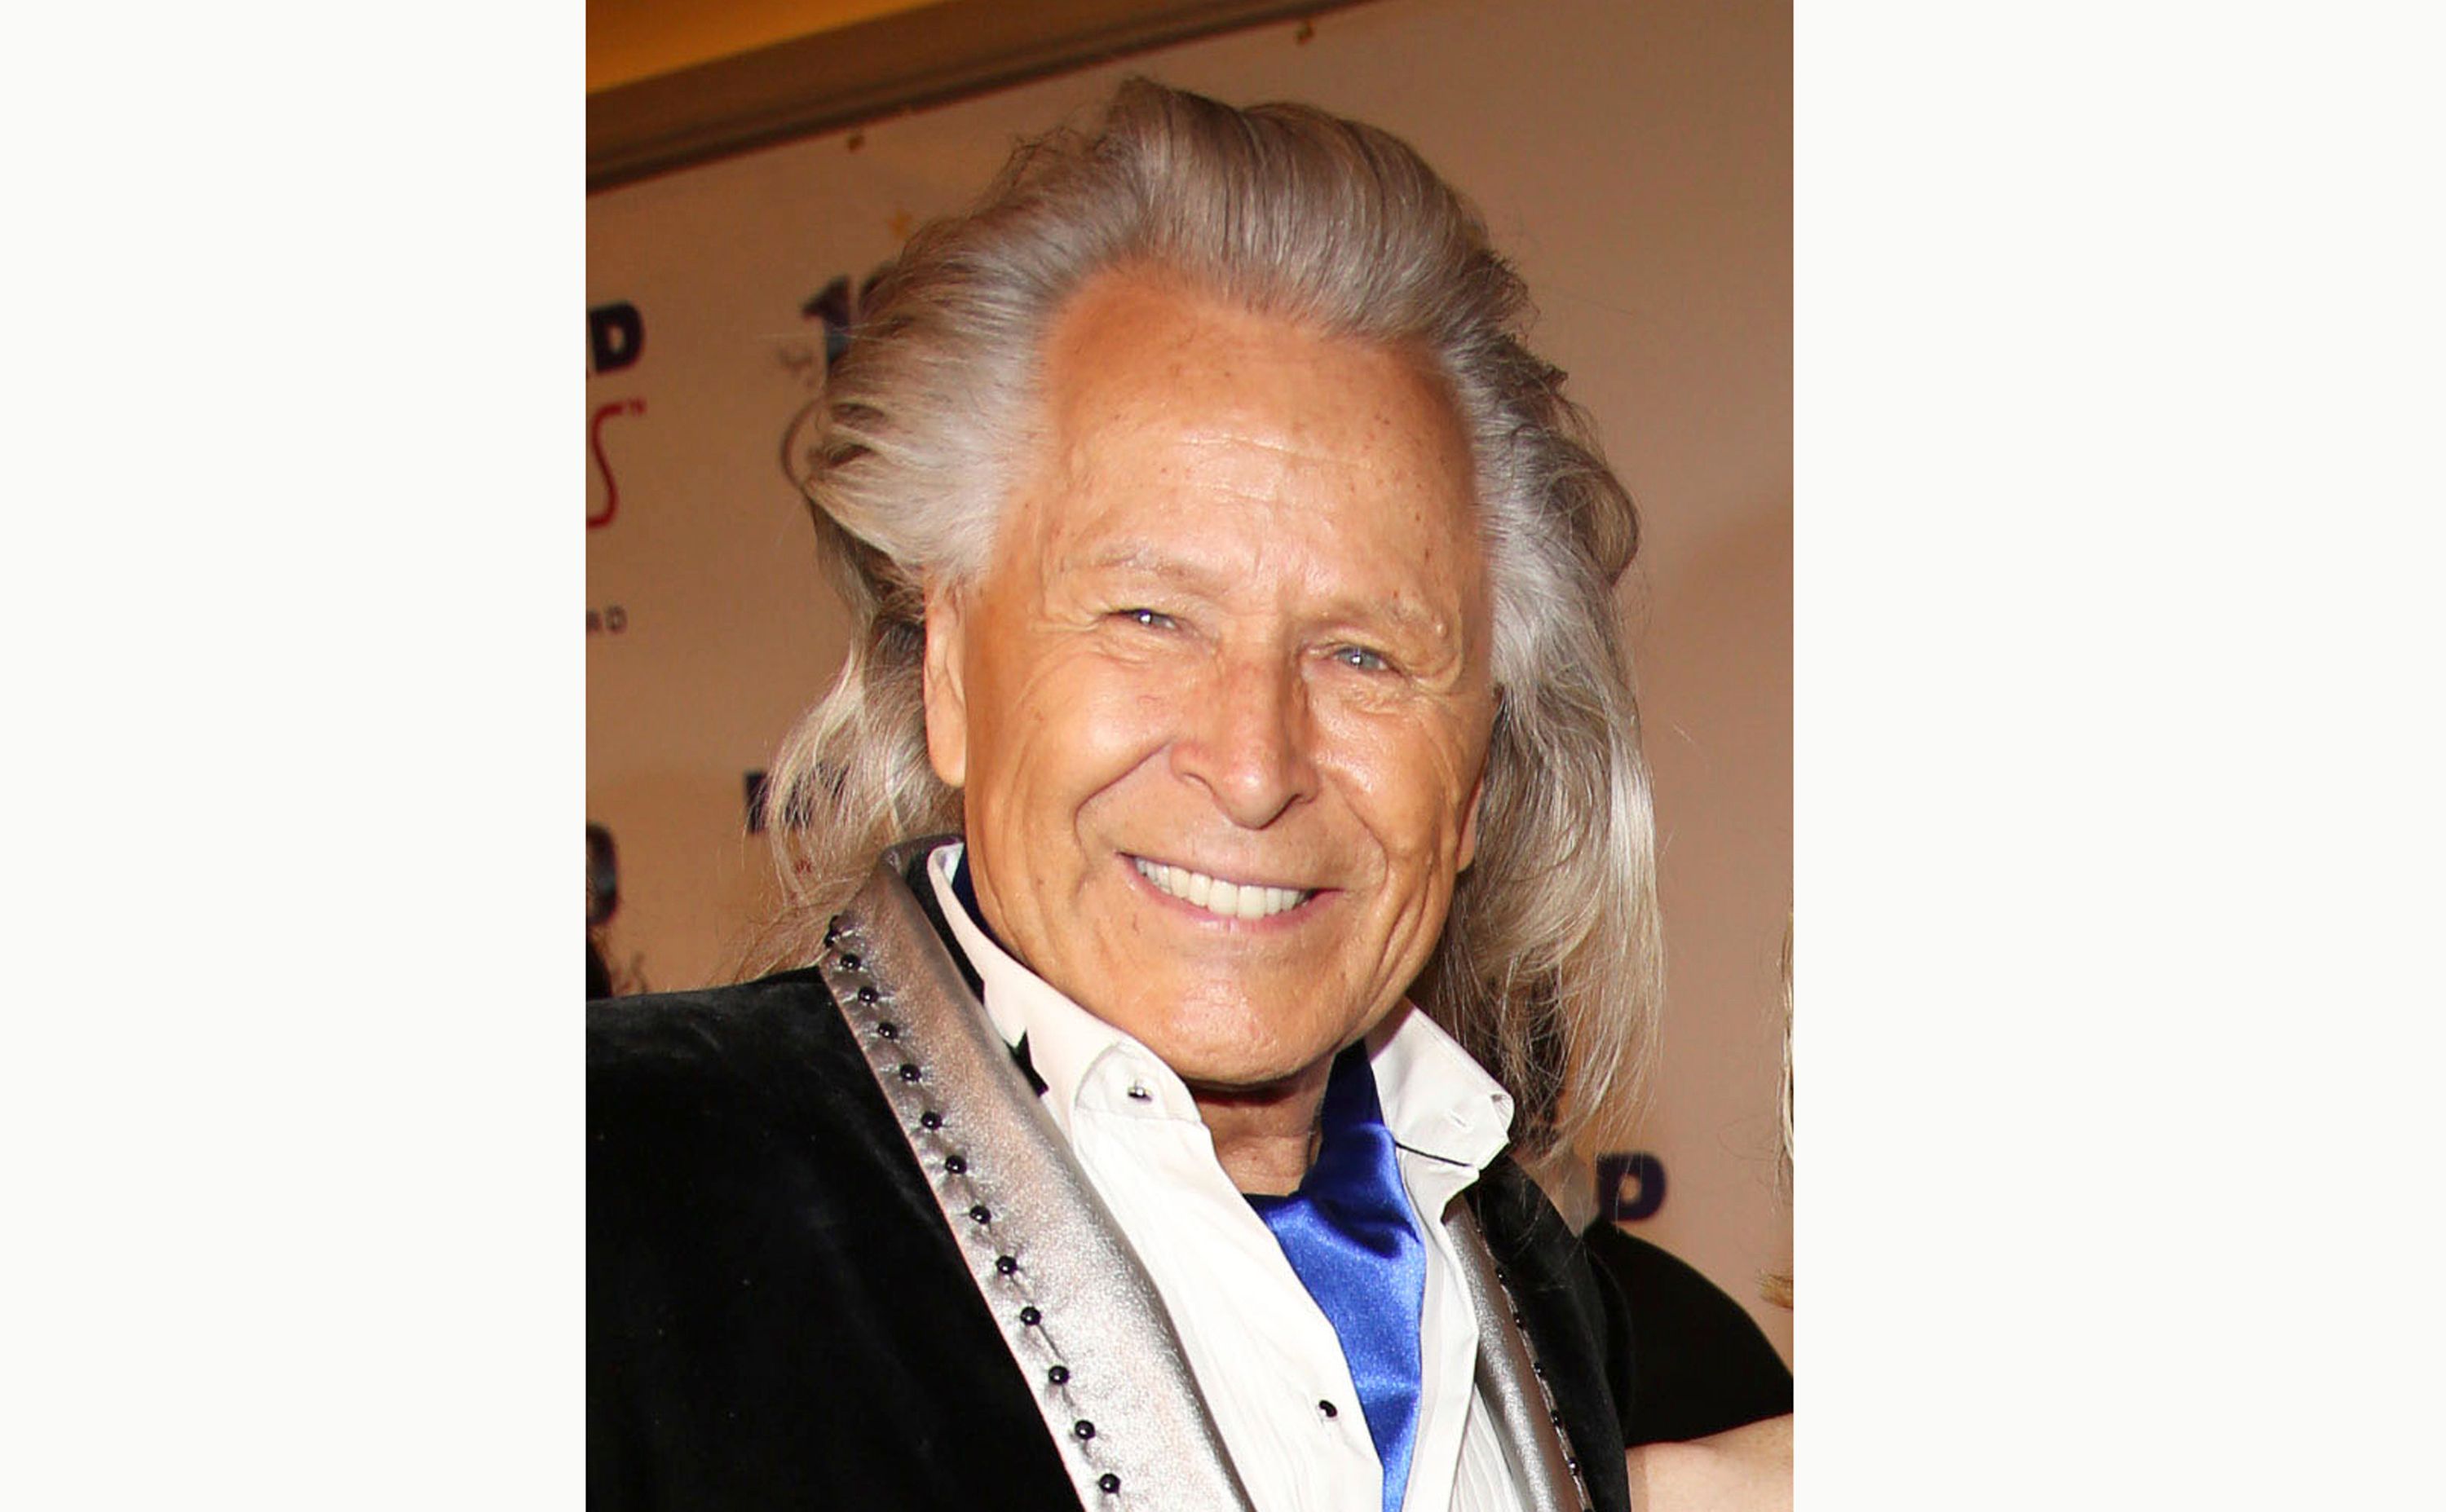 Fashion mogul Peter Nygard arrested in Canada on sex charges The Seattle Times